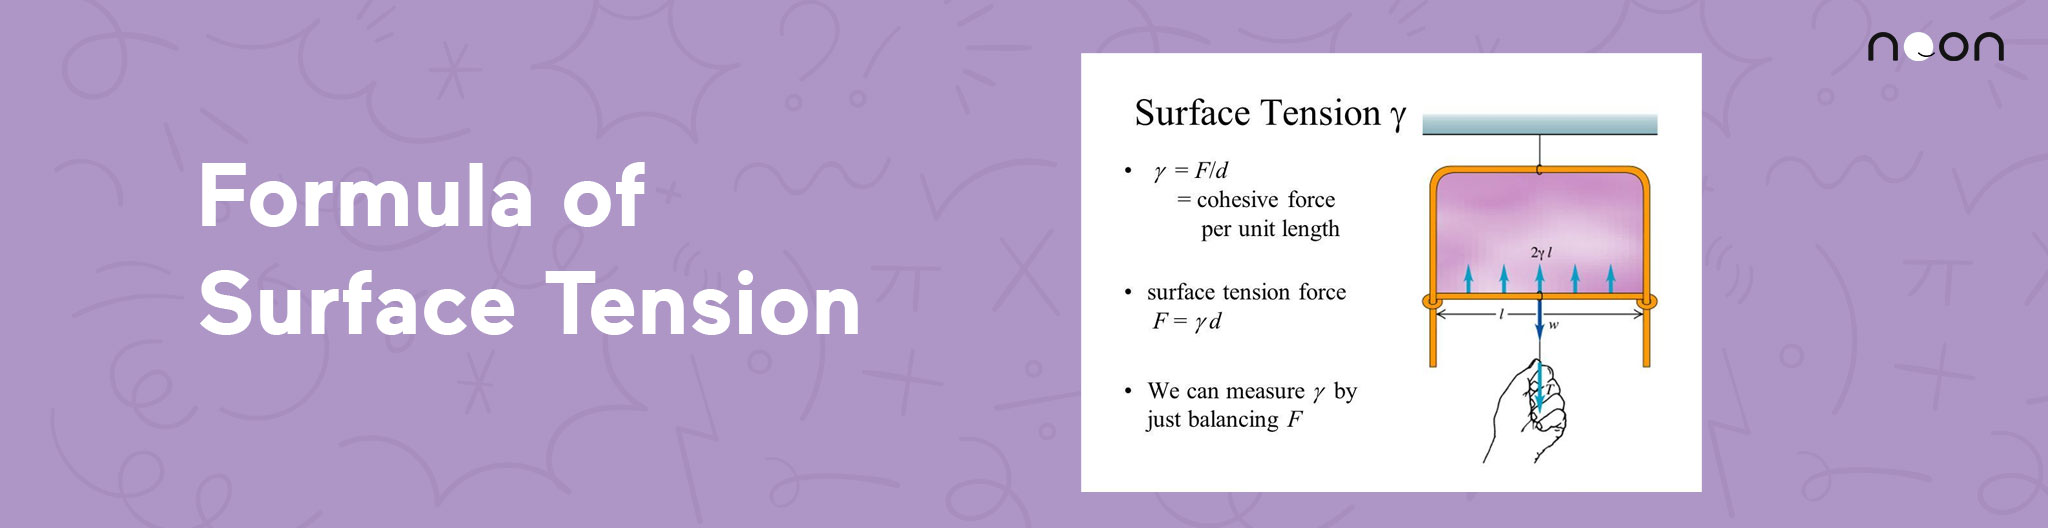 Formula of Surface Tension